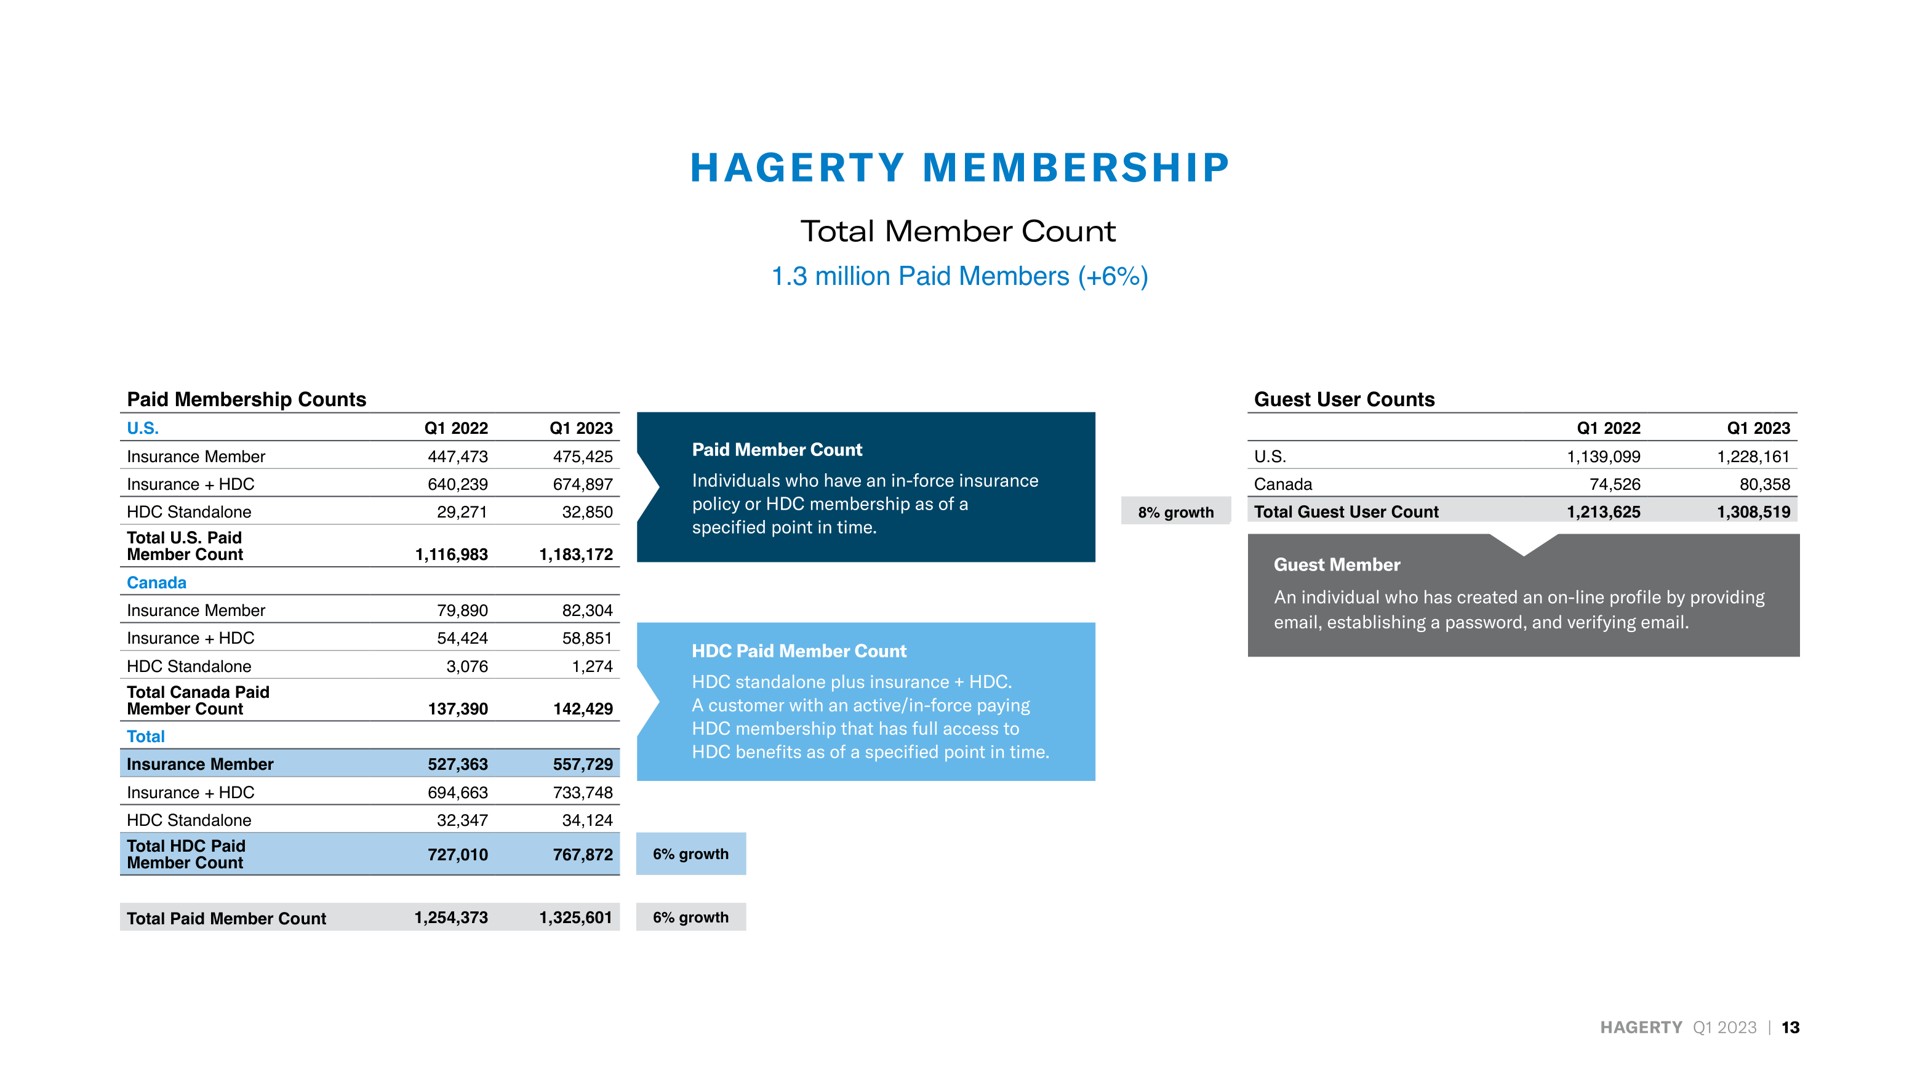 million paid members membership total member count individuals who have an in force insurance growth guest user counts us canada total guest user count membership counts insurance member insurance count growth | Hagerty